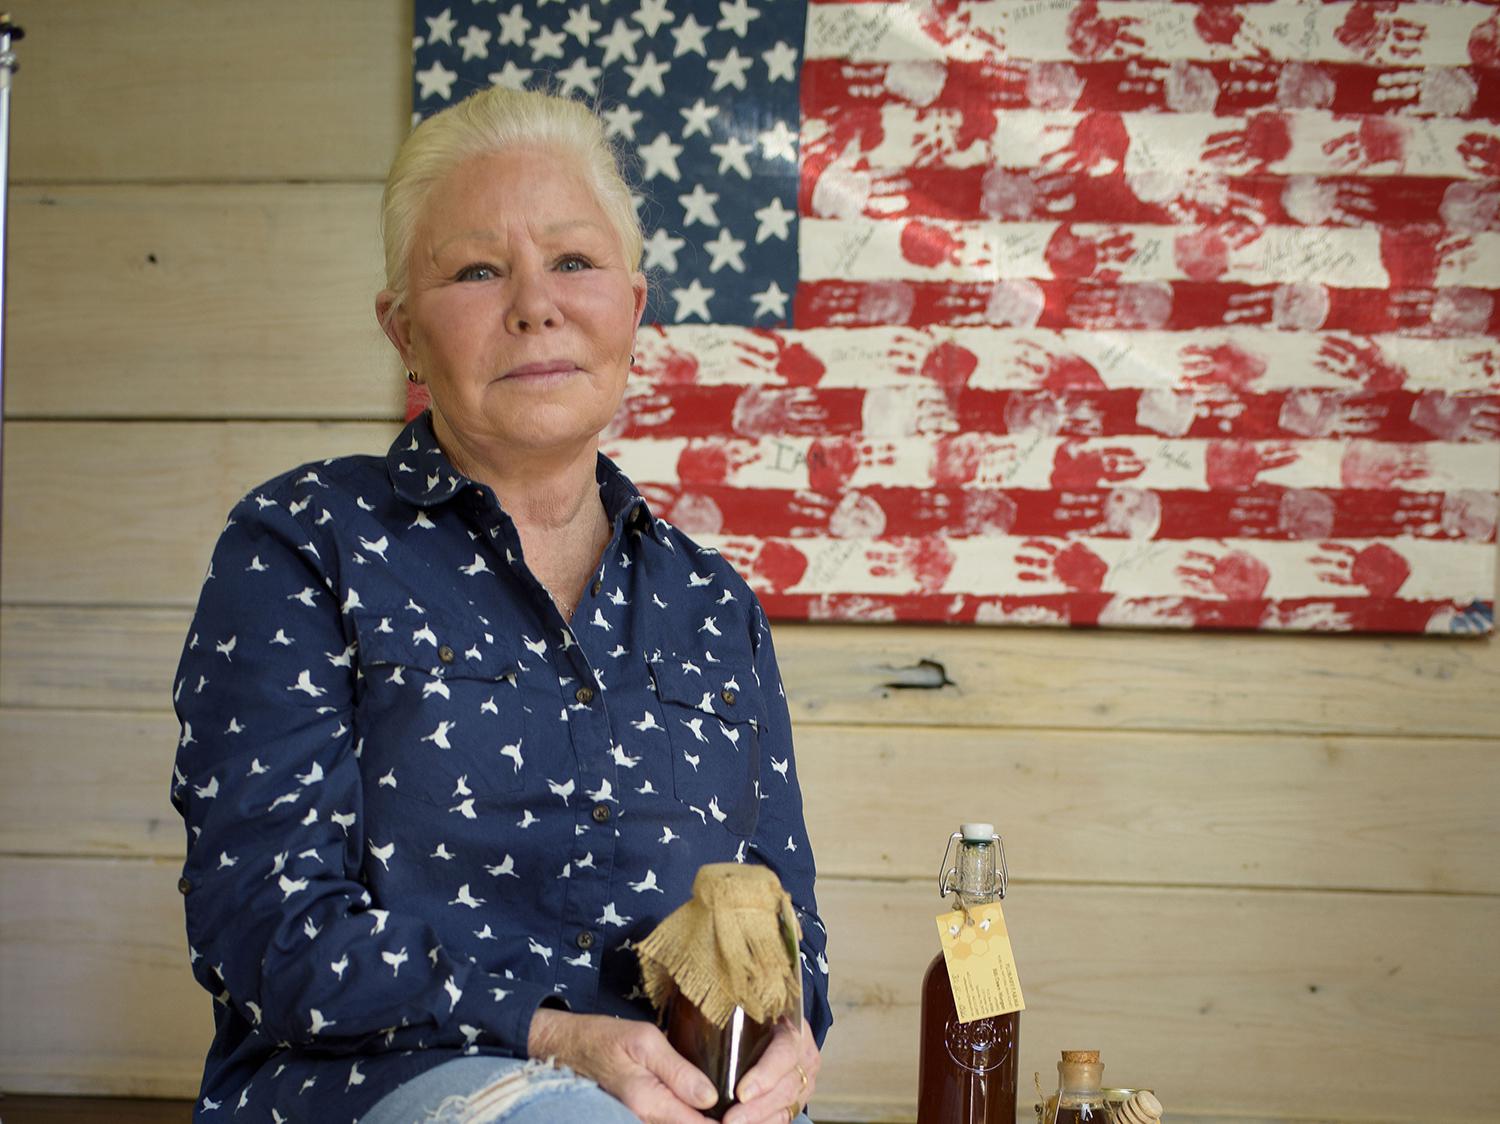 Dawn Morgan manages more than 20 hives at FloBaby Farms and sells raw honey, comb honey and beeswax from her home in Starkville, Mississippi on Nov. 22, 2016. (Photo by MSU Extension Service/Kevin Hudson)